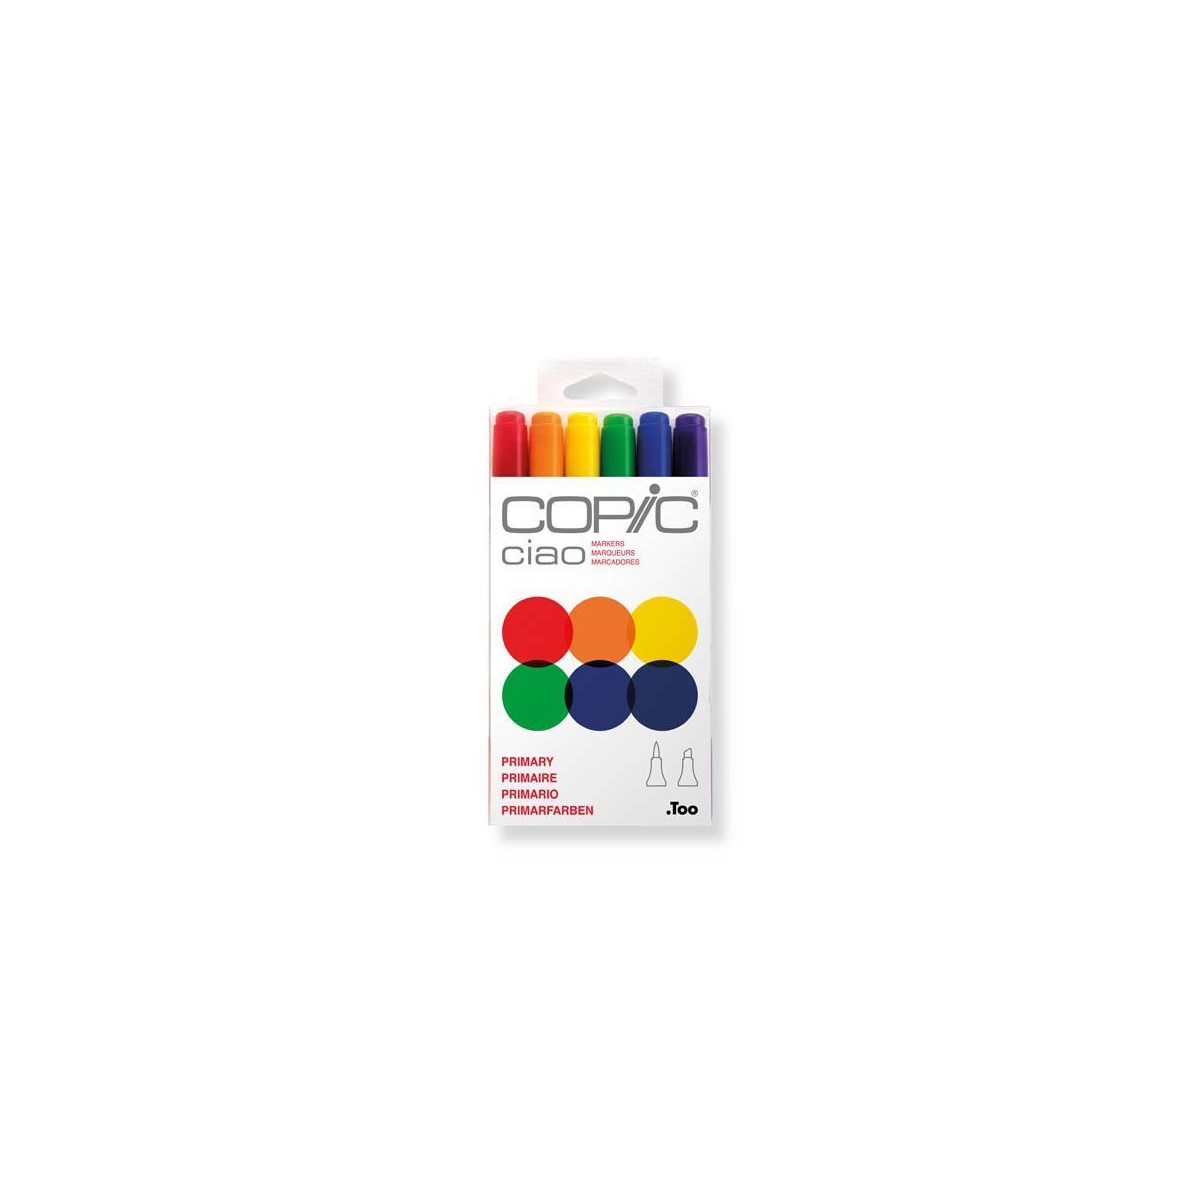 COPIC CIAO 6uds set Primary